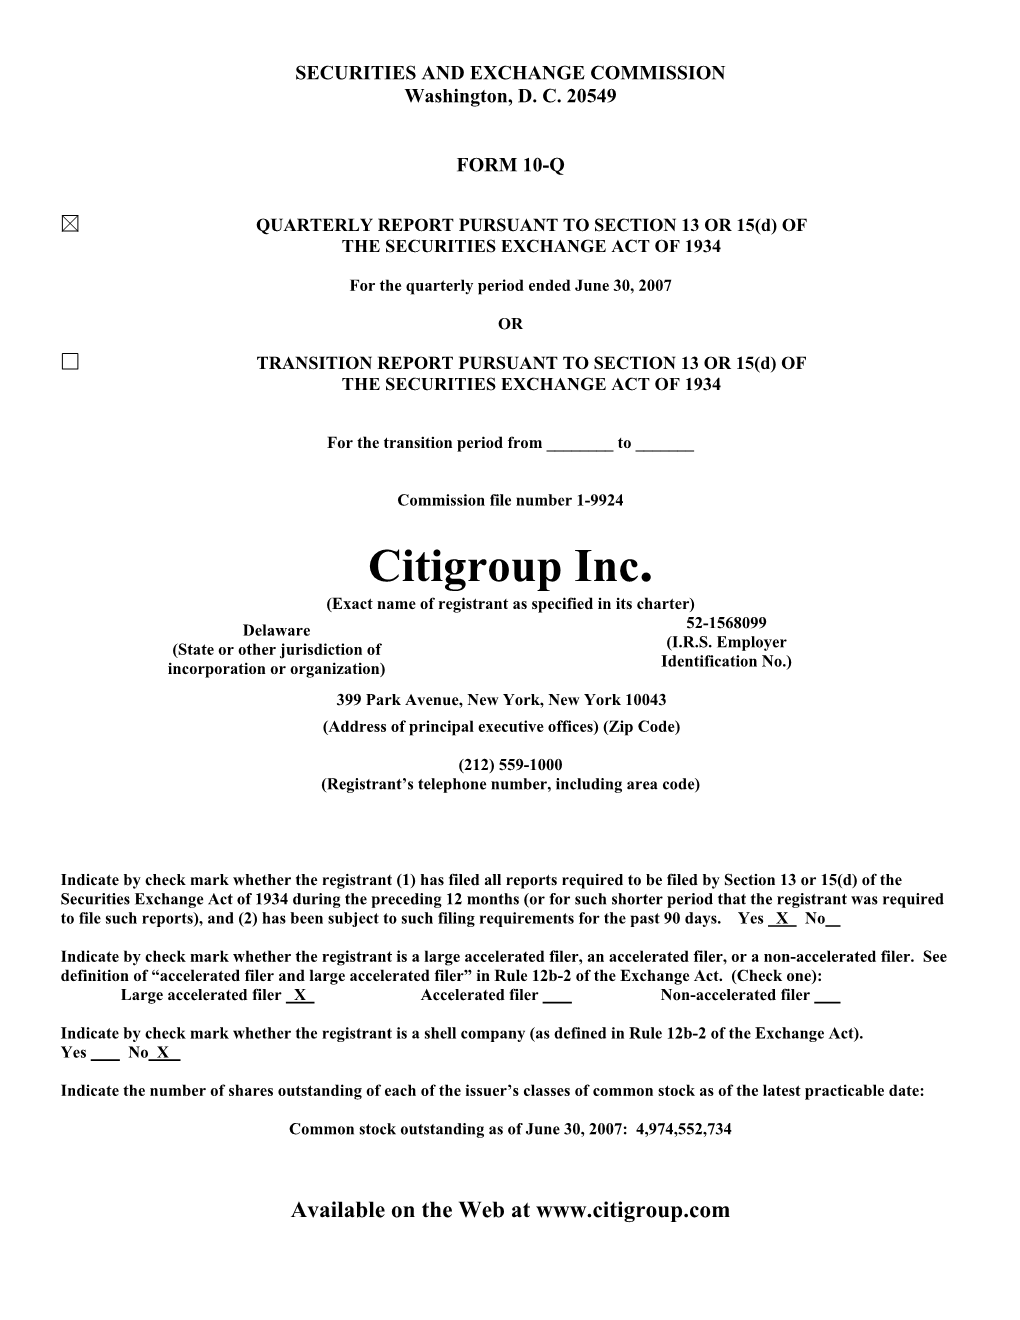 Citigroup Inc. (Exact Name of Registrant As Specified in Its Charter) Delaware 52-1568099 (State Or Other Jurisdiction of (I.R.S